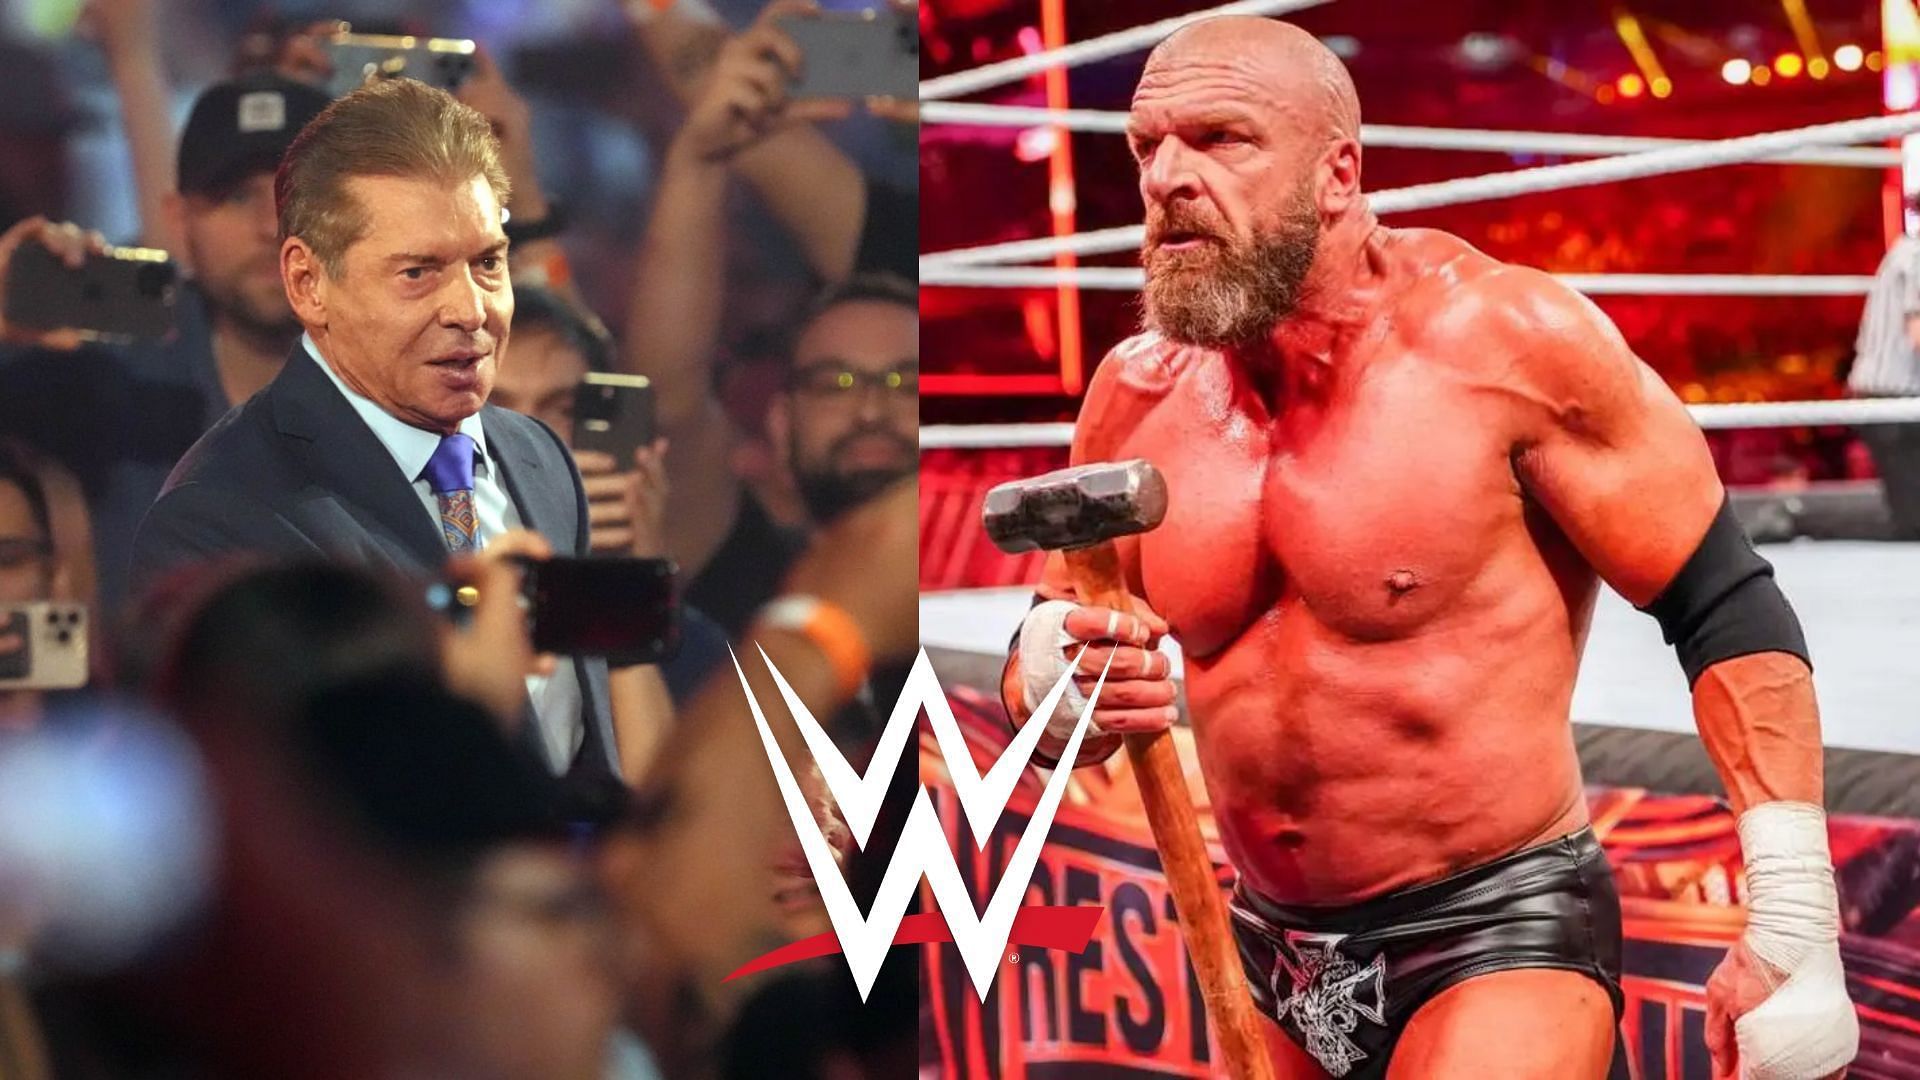 Vince McMahon retired and Triple H called it a career before taking charge as Chief Content Officer